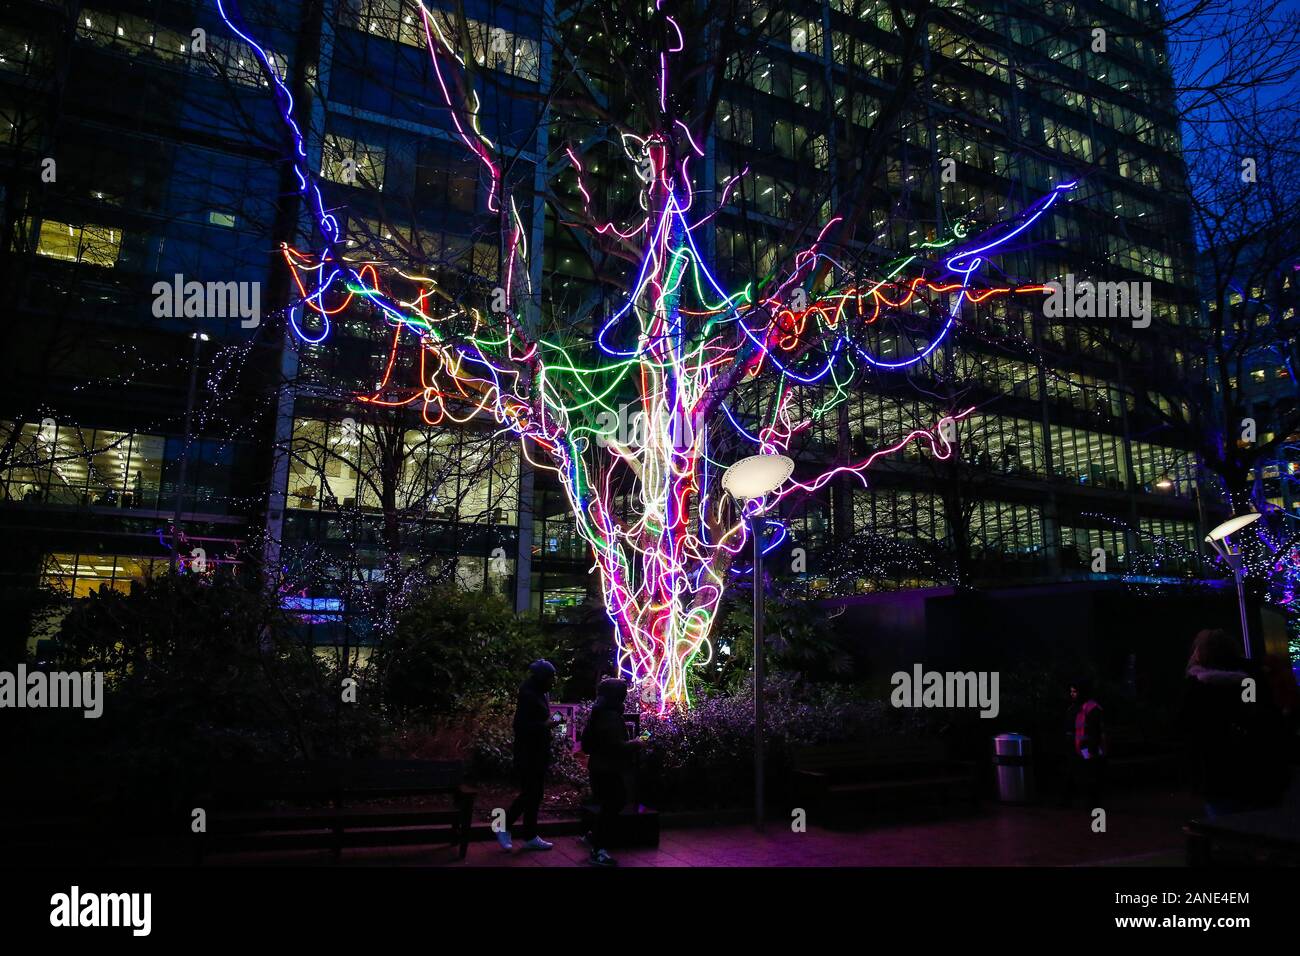 Neon Tree art installation is seen during the opening day of the Canary Wharf Winter Light Festival in Docklands, London. The festival is open to public daily from 4pm to 10pm until 25 January 2020. Neon flex transforms a tree into a striking sculpture Canada Square Park. This colourful display shines subtly by day and dazzle by night. Stock Photo